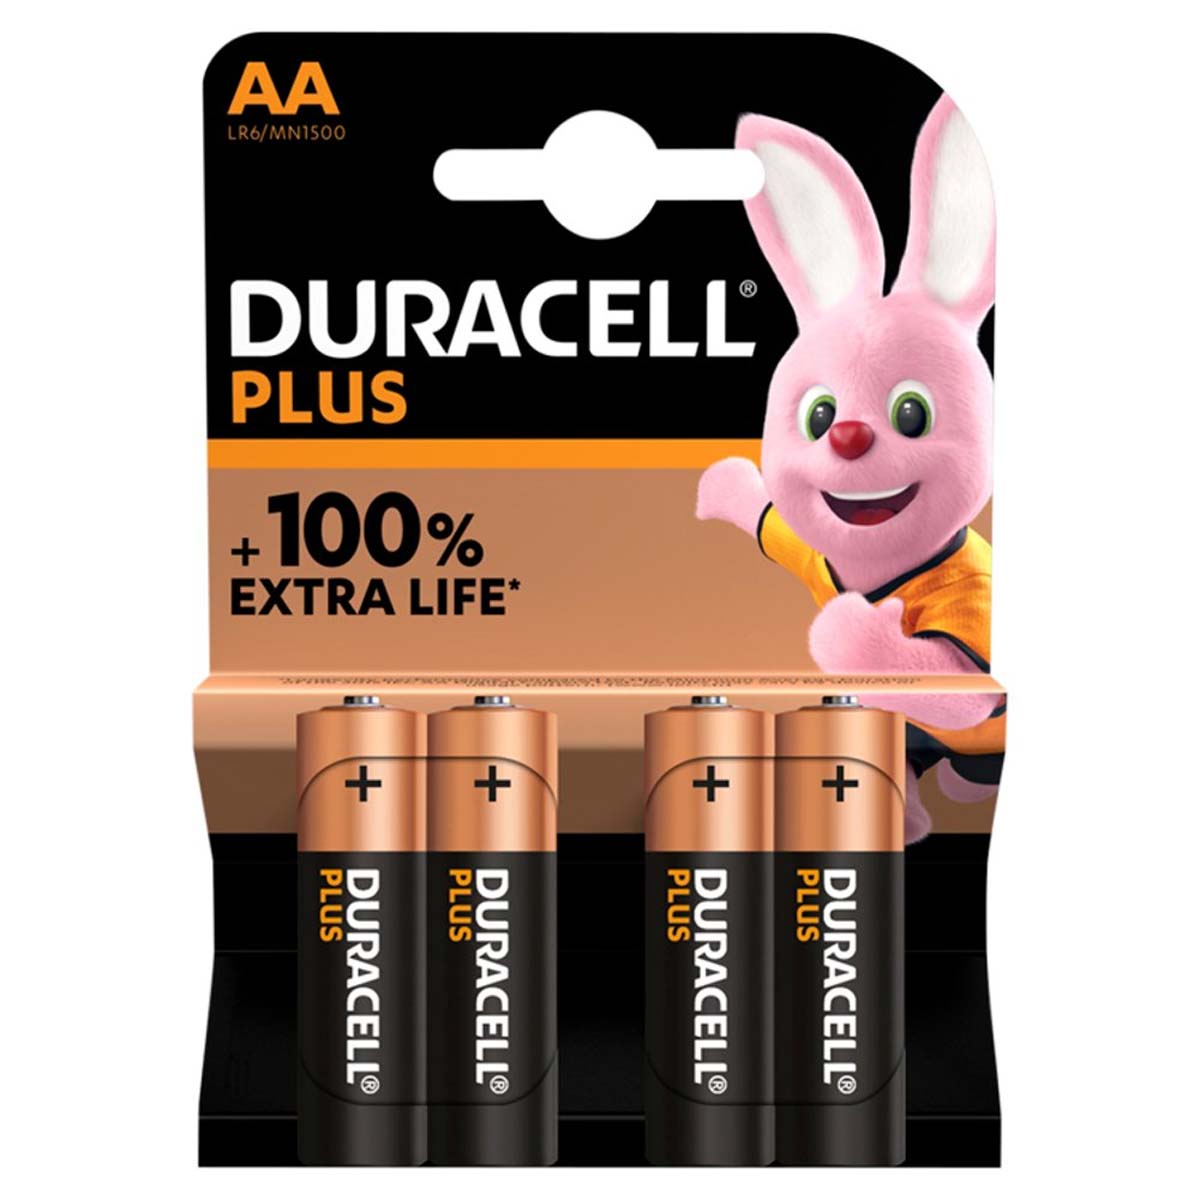 Duracell Plus - AA Alkaline 100% Extra Life Batteries - 4 Pack - Continental Food Store